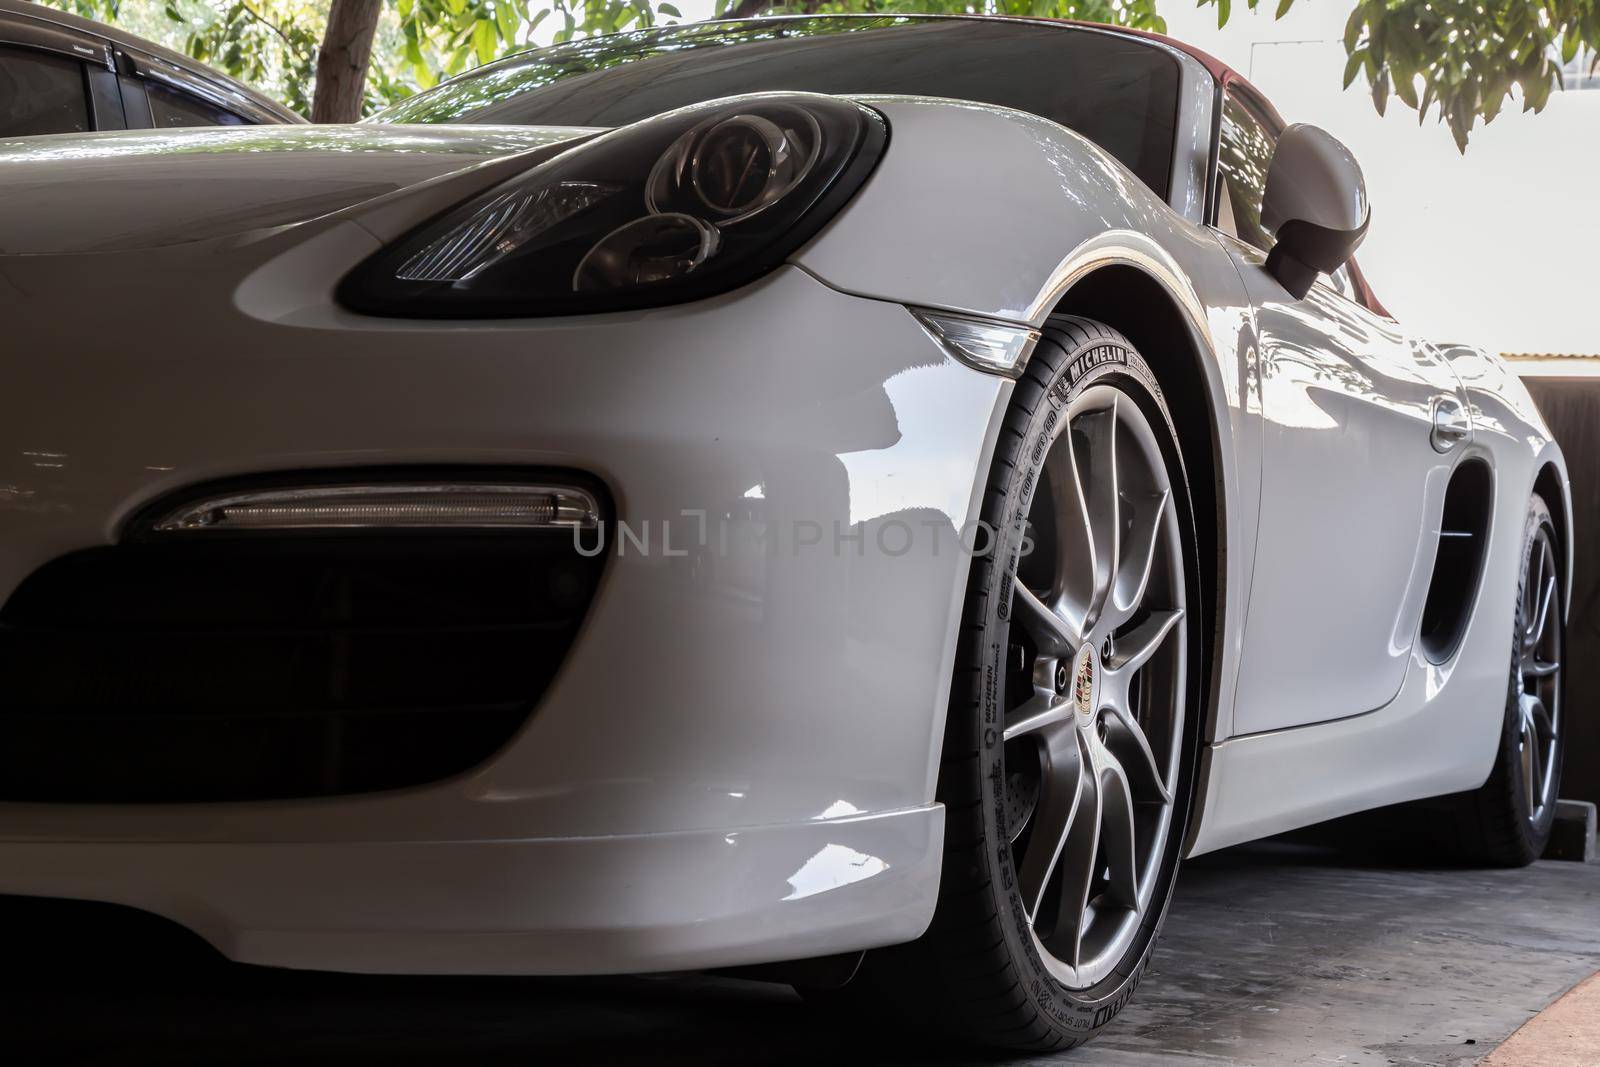 Close-up of Car Headlights and Car Wheel of White Porsche Sports Car parked in the parking lot.  by tosirikul